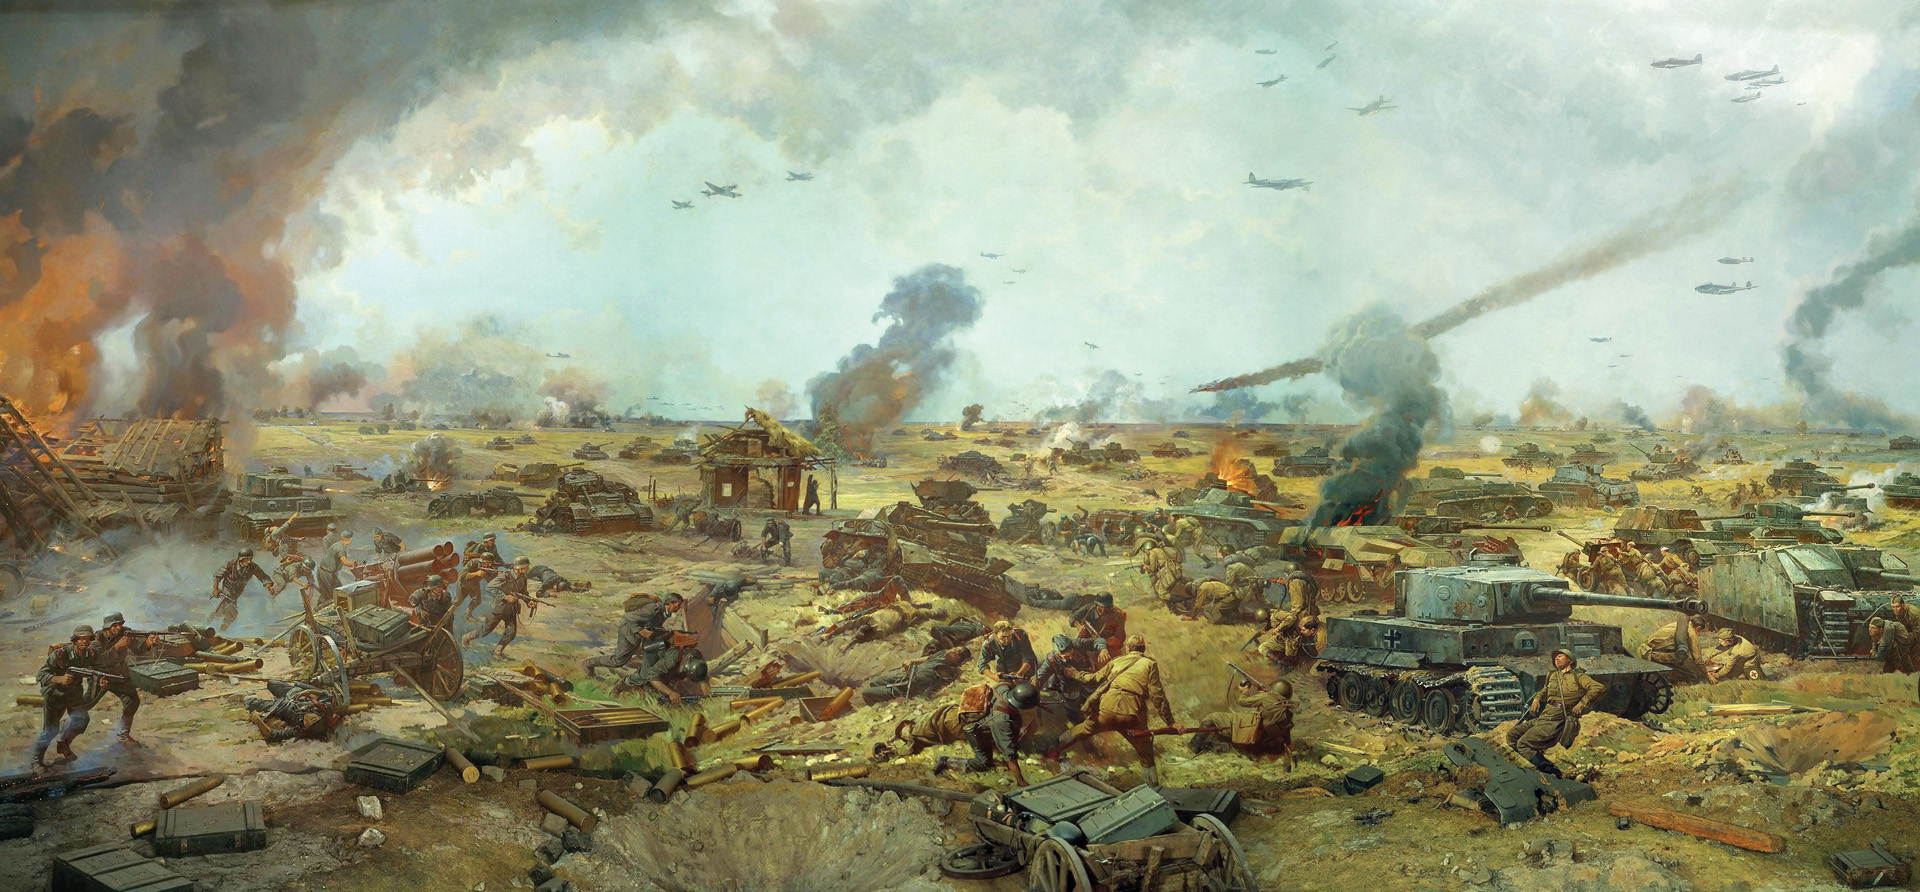 This mural, located in the Central Museum of the Great Patriotic War in Moscow, depicts the desperation of the fighting at Kursk as soldiers engage in hand-to-hand combat and tanks fire at one another from close range.